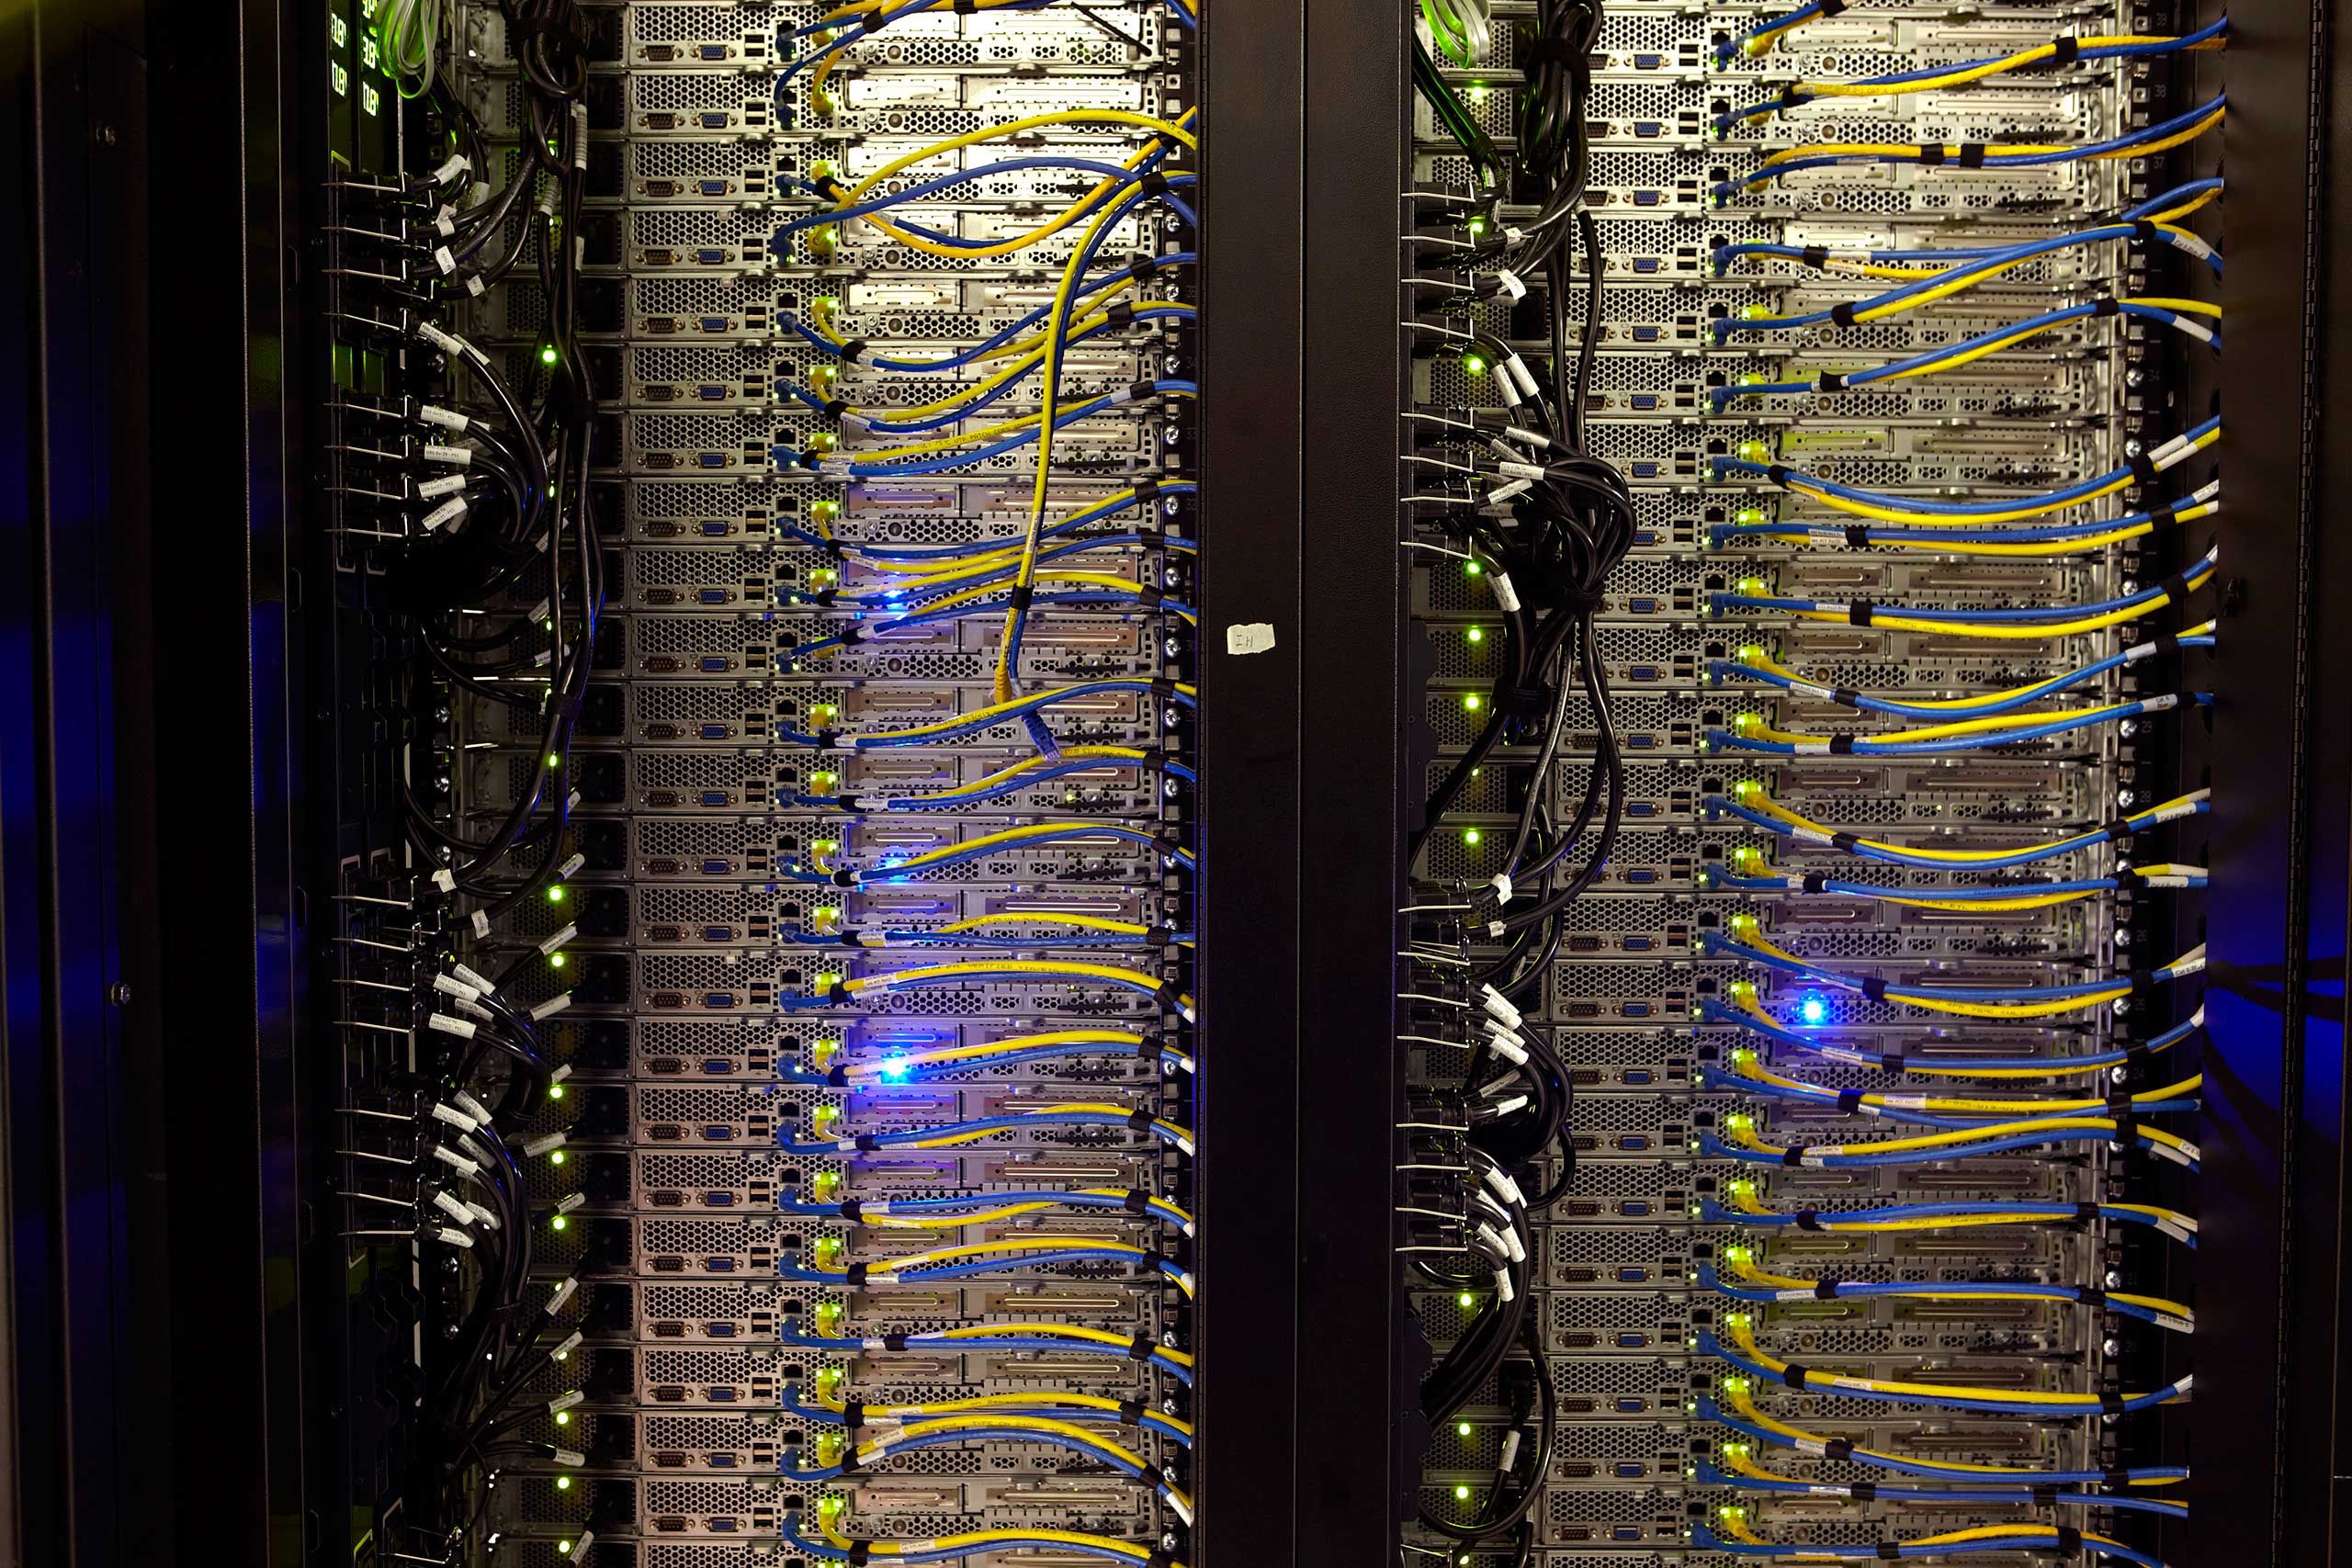 A close up of the servers in two racks.